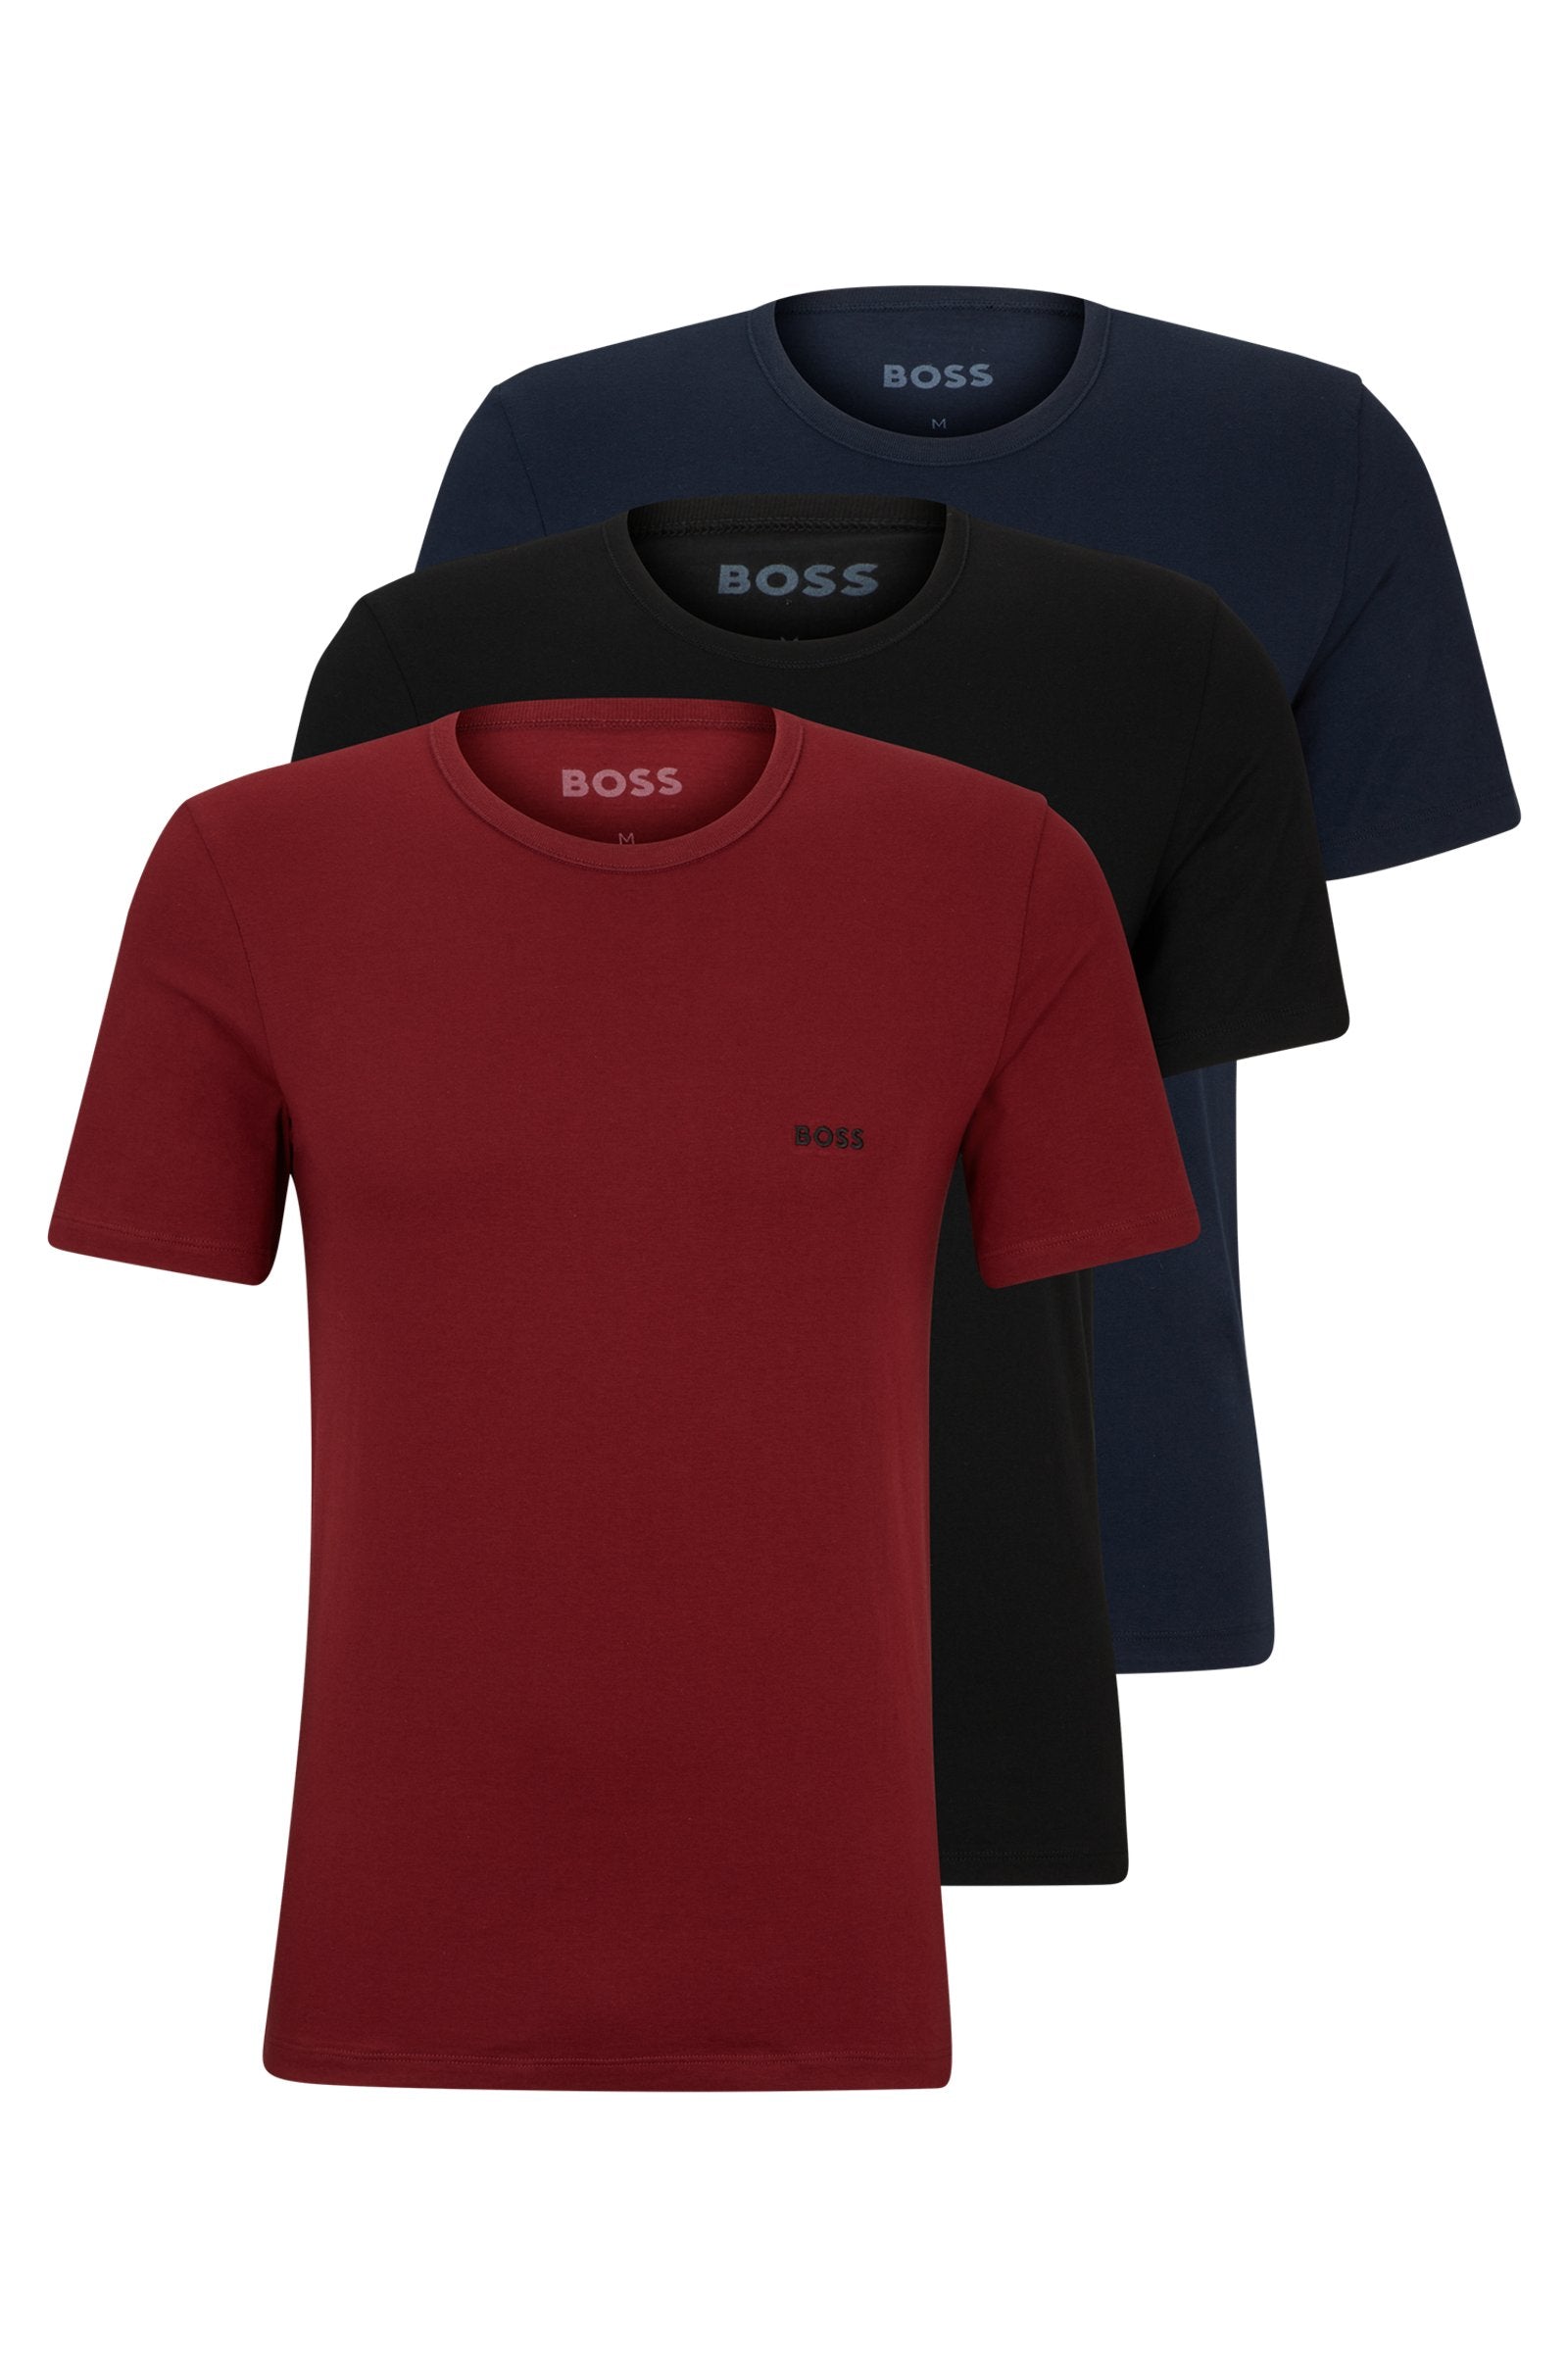 BOSS - 3-Pack Of Logo Embroidered T-Shirts In Cotton In RED, NAVY and BLACK 50499445 977